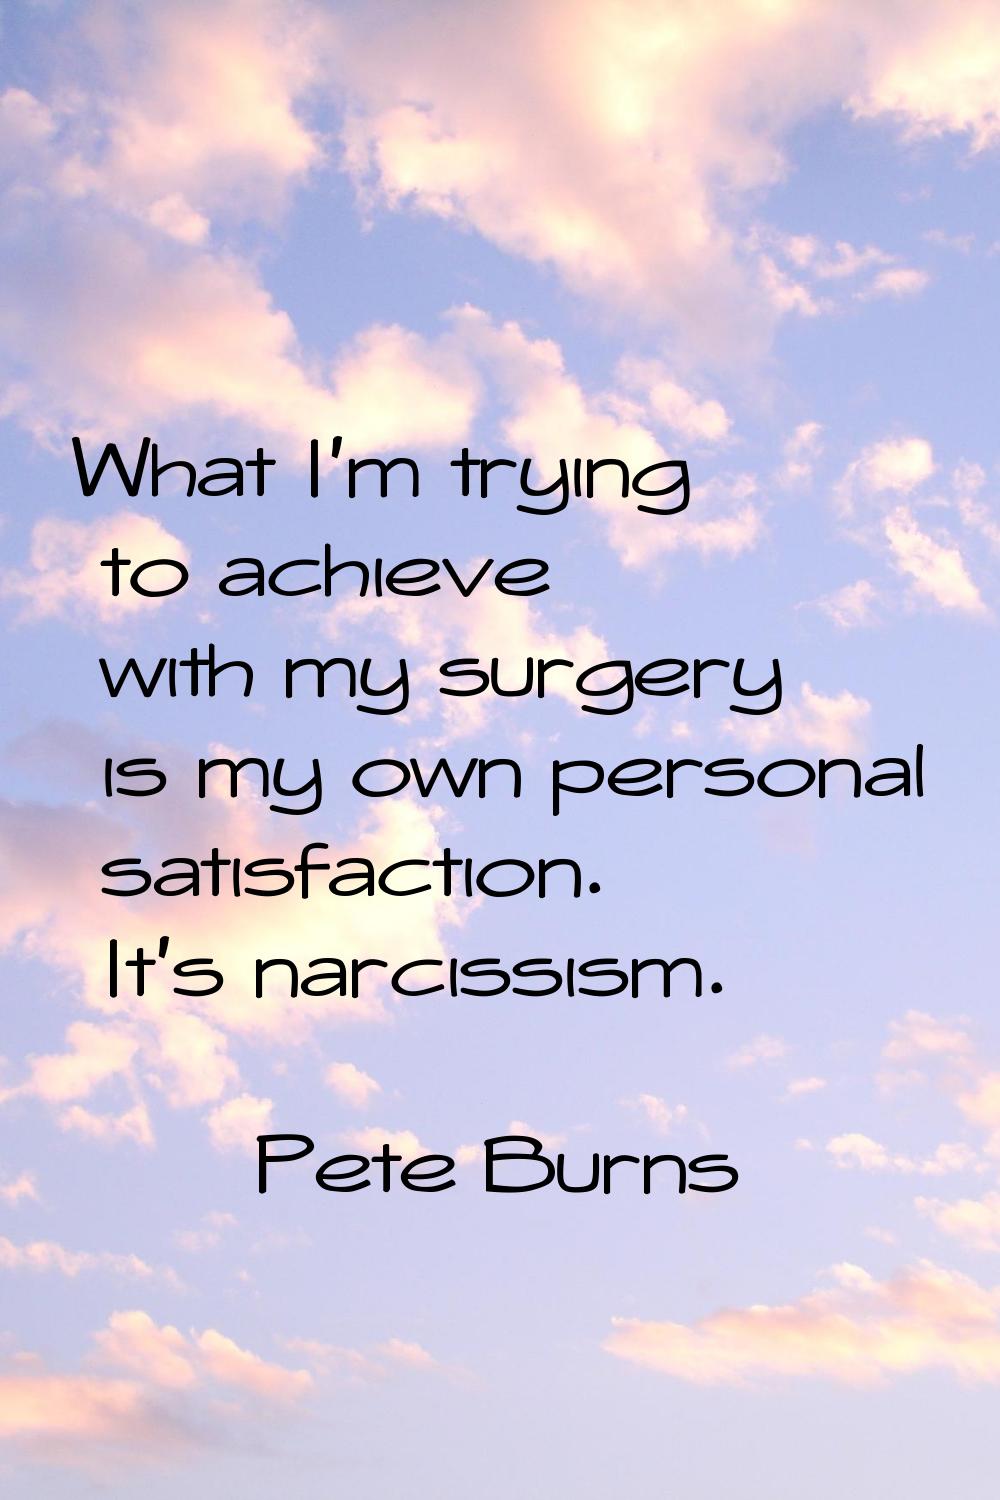 What I'm trying to achieve with my surgery is my own personal satisfaction. It's narcissism.